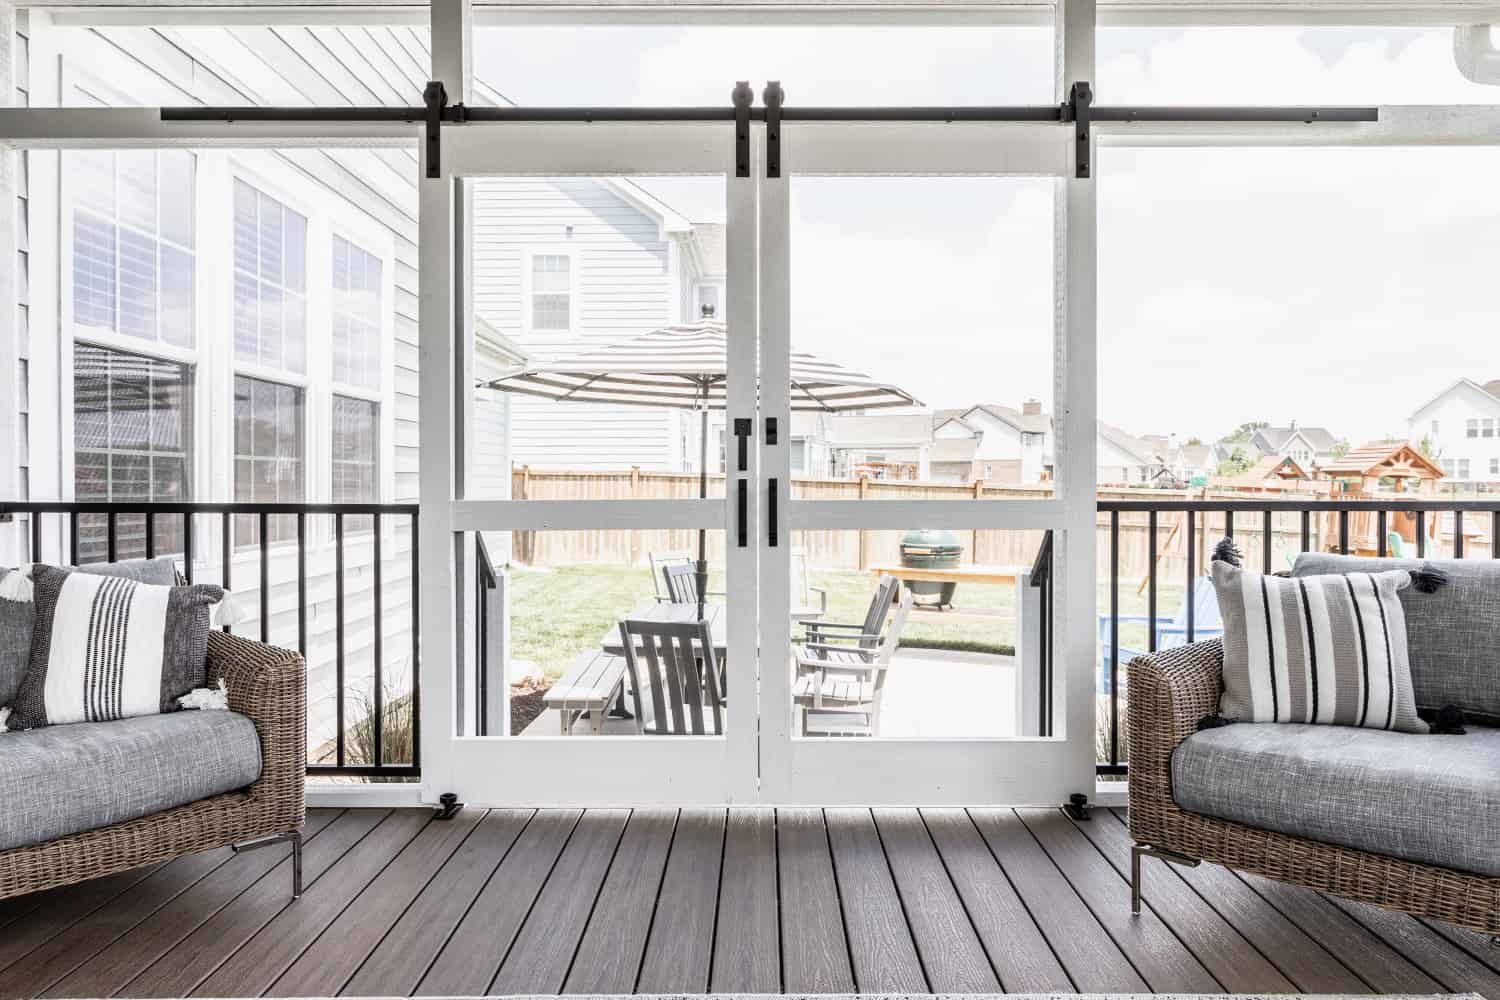 Nicholas Design Build | A remodeled patio with wicker furniture and a sliding glass door.